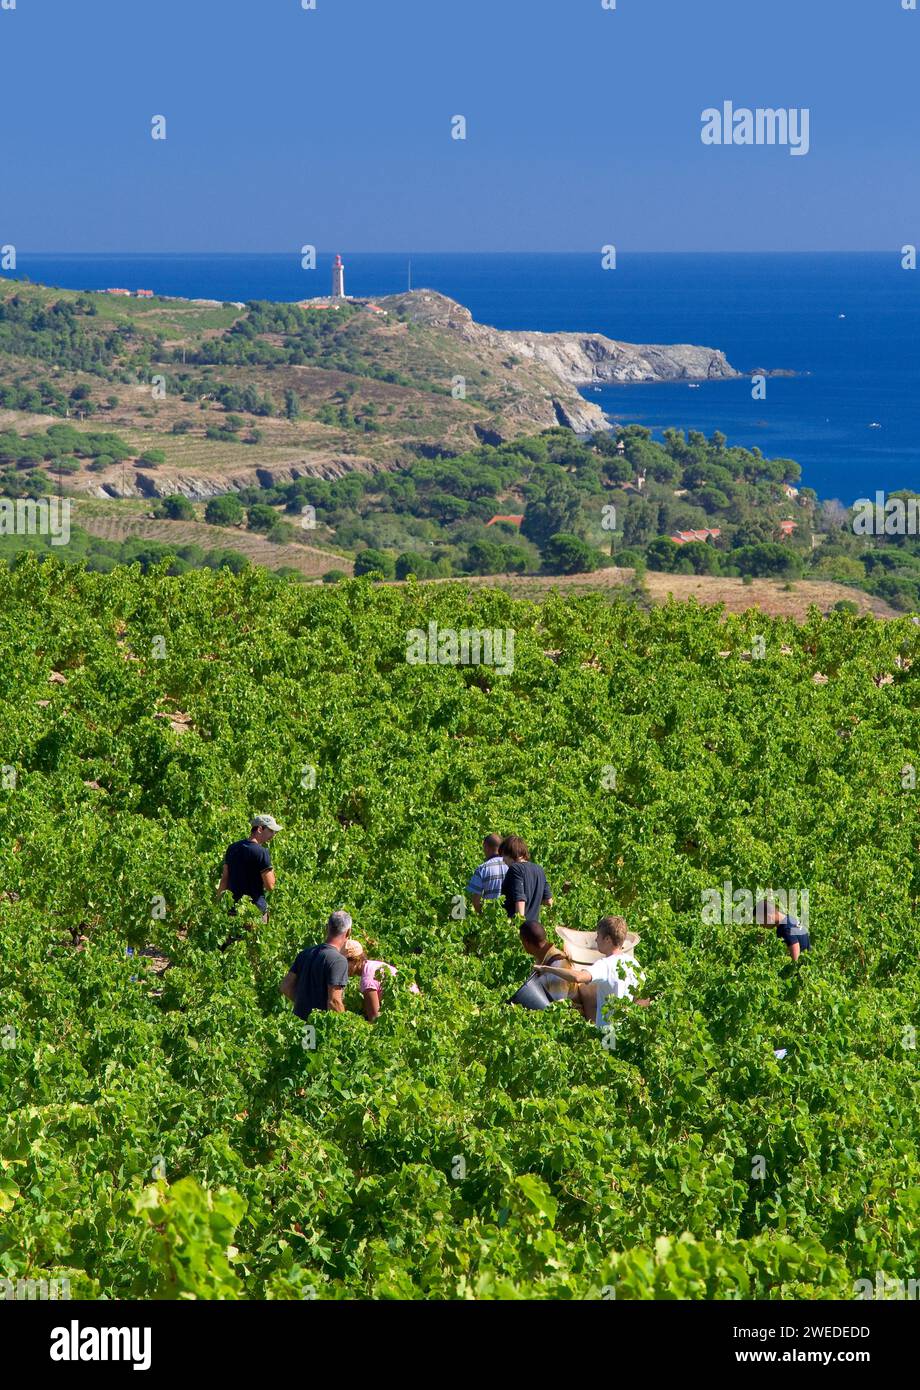 FRANCE. PYRENEES ORIENTALES (66) COSPRONS. HARVEST SEASON ON THE SHORES OF THE MEDITERRANEAN SEA Stock Photo